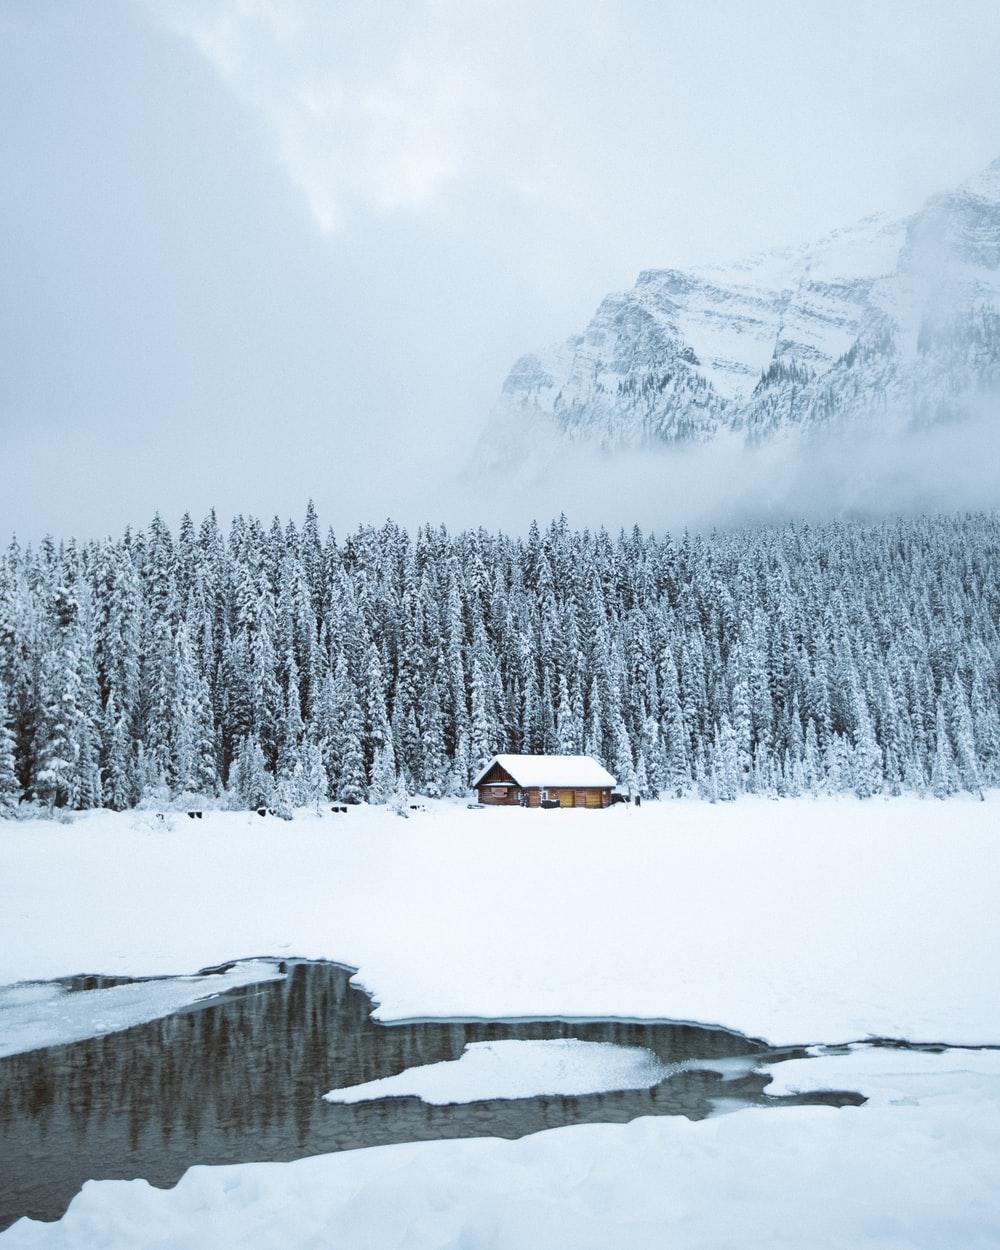 Winter Cabin Picture. Download Free Image